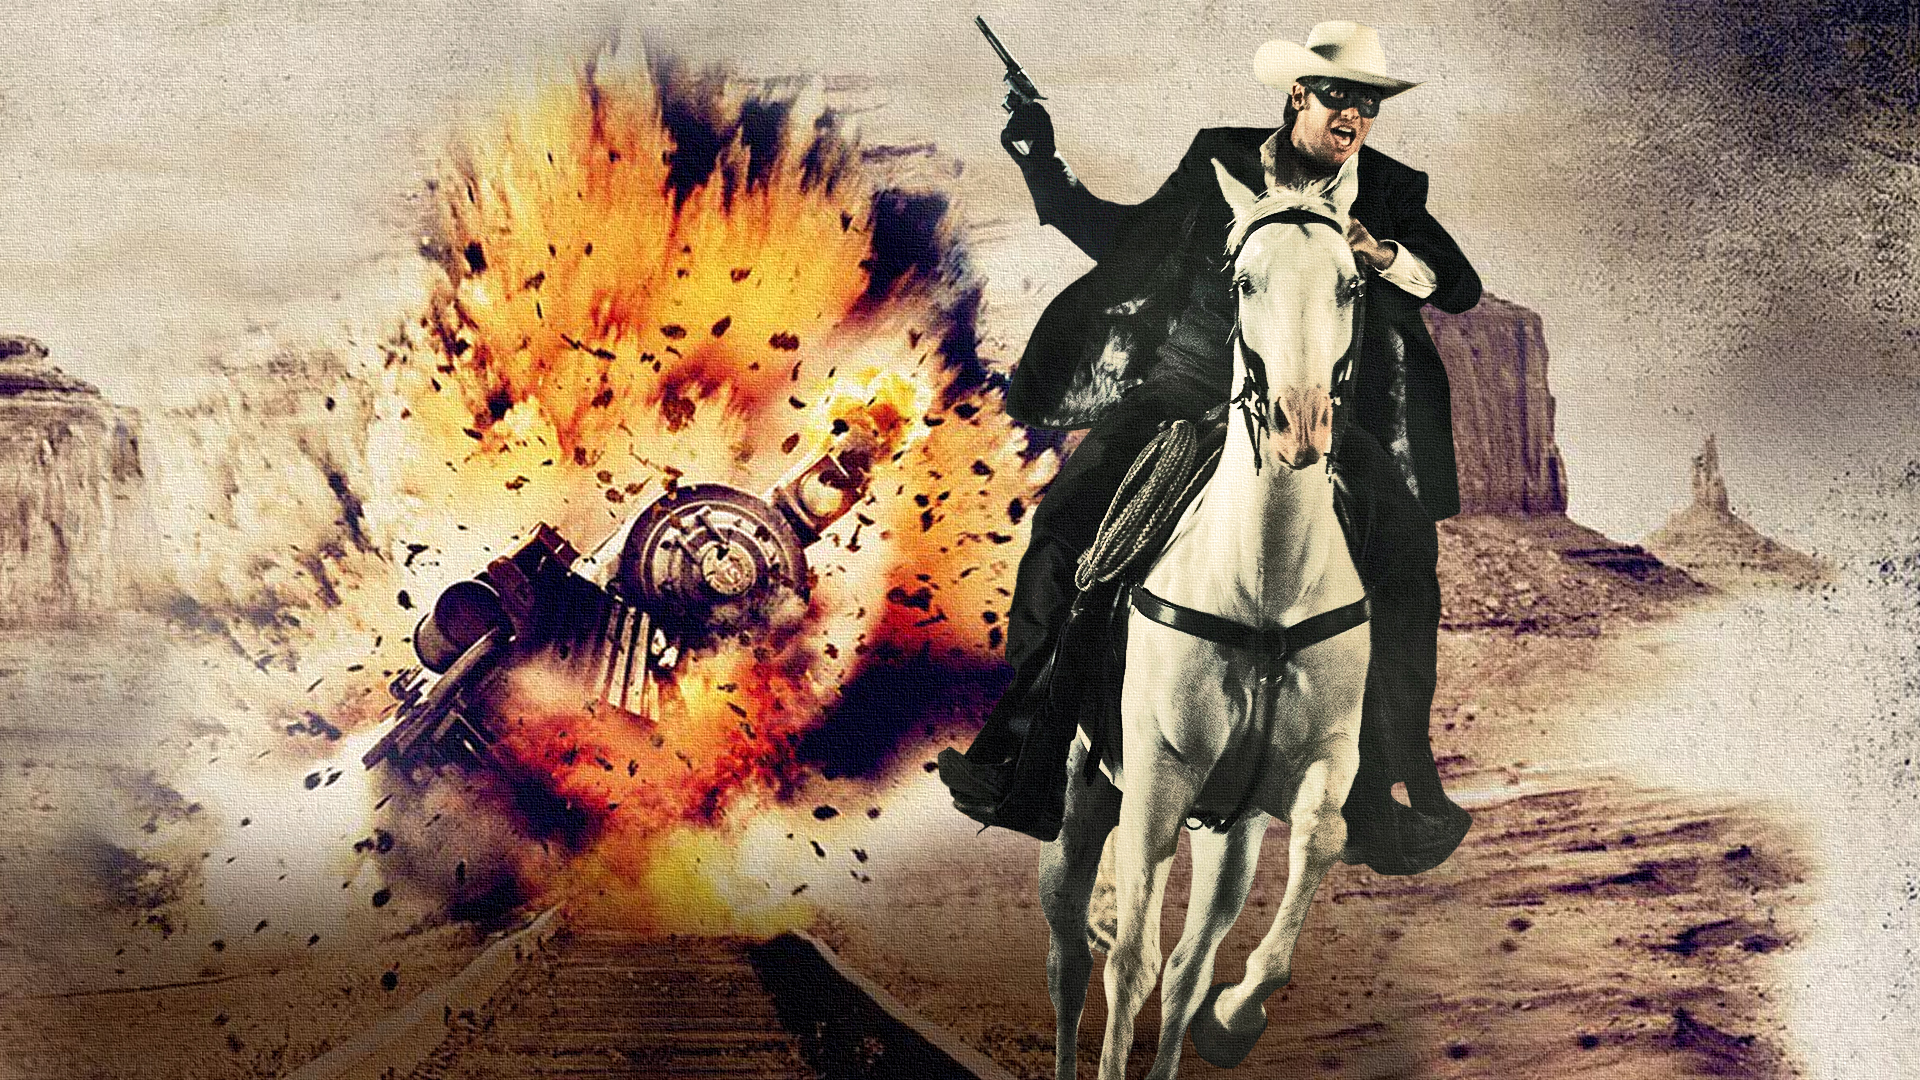 The Lone Ranger Wallpaper By Sachso74